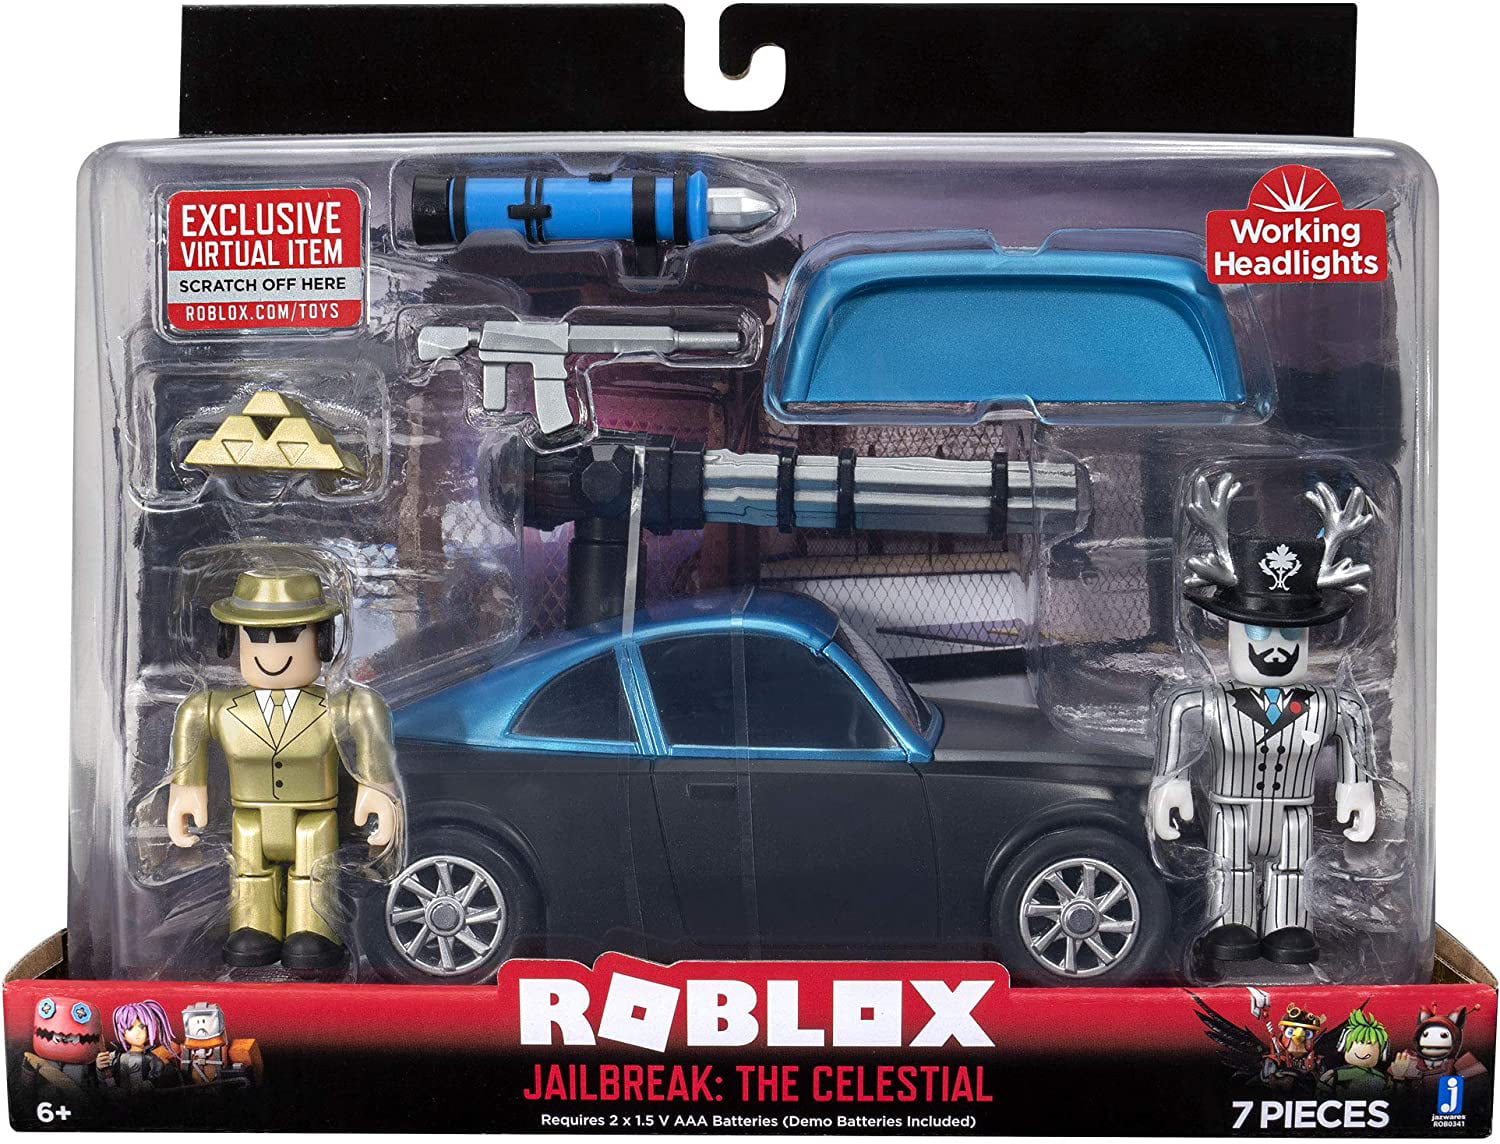 Roblox Action Collection Jailbreak The Celestial Deluxe Vehicle Includes Exclusive Virtual Item Walmart Com Walmart Com - roblox how to build a vehicle